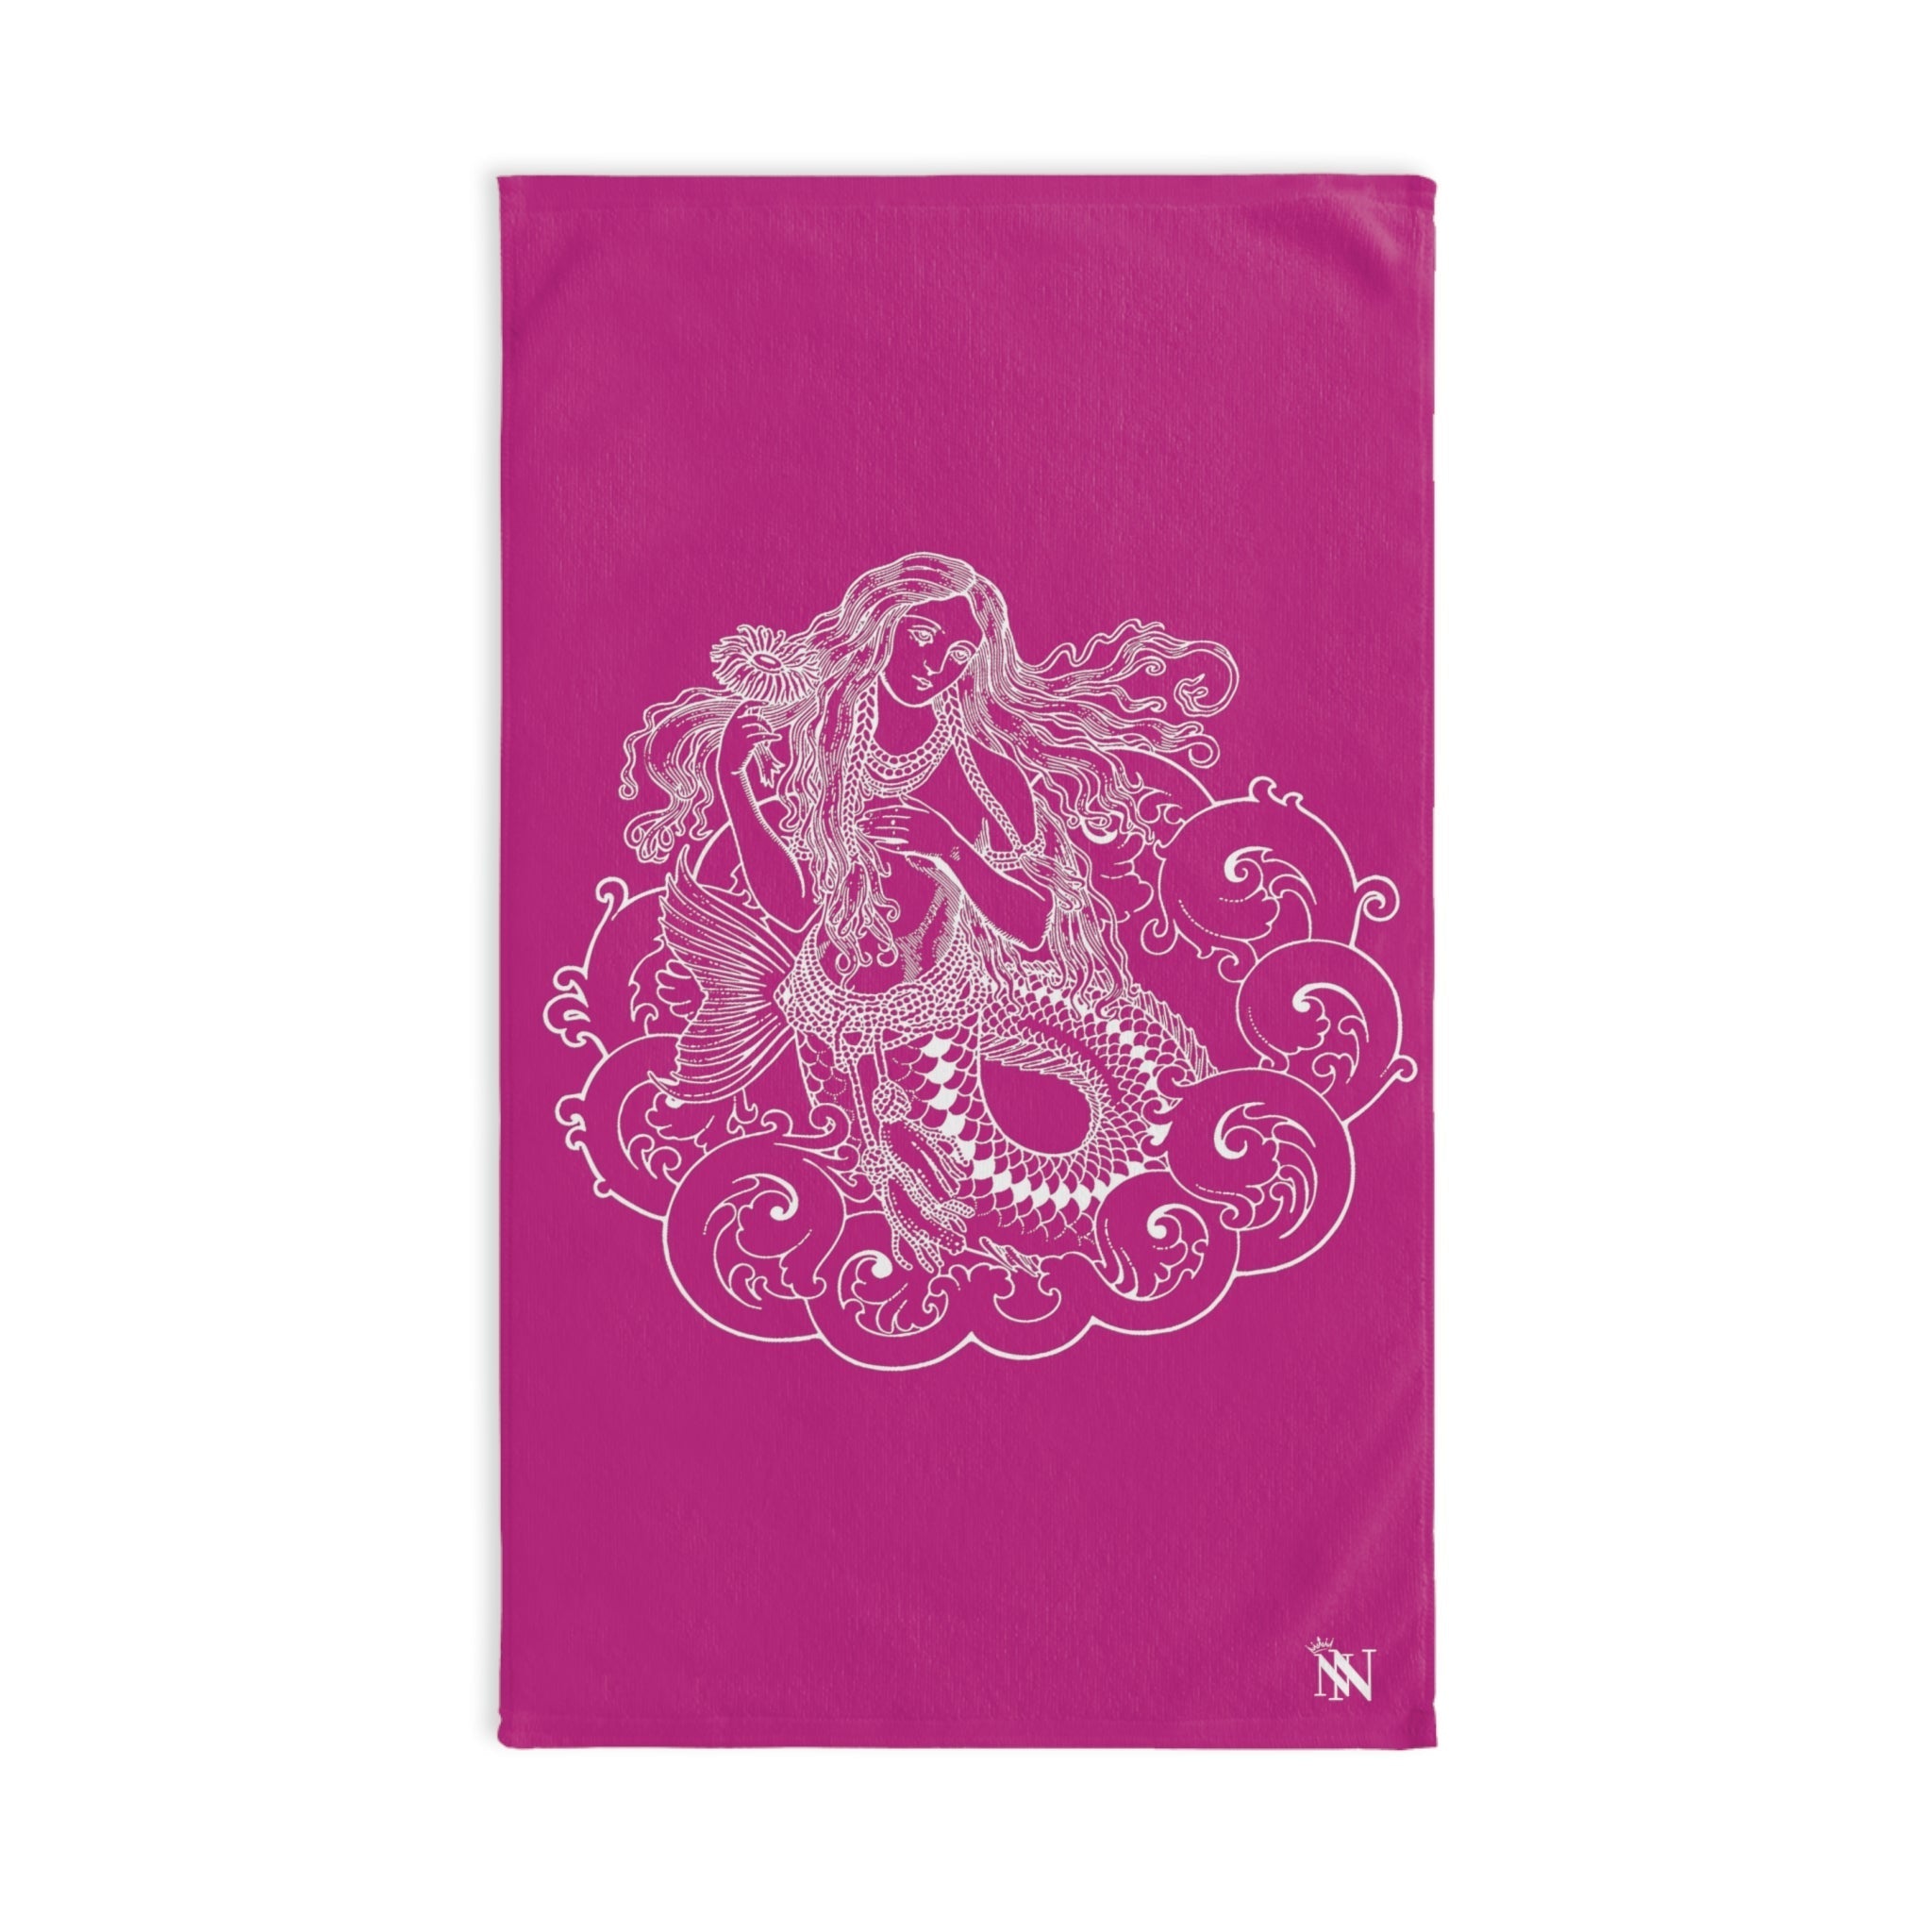 Wave Mermaid Sea Fuscia | Funny Gifts for Men - Gifts for Him - Birthday Gifts for Men, Him, Husband, Boyfriend, New Couple Gifts, Fathers & Valentines Day Gifts, Hand Towels NECTAR NAPKINS